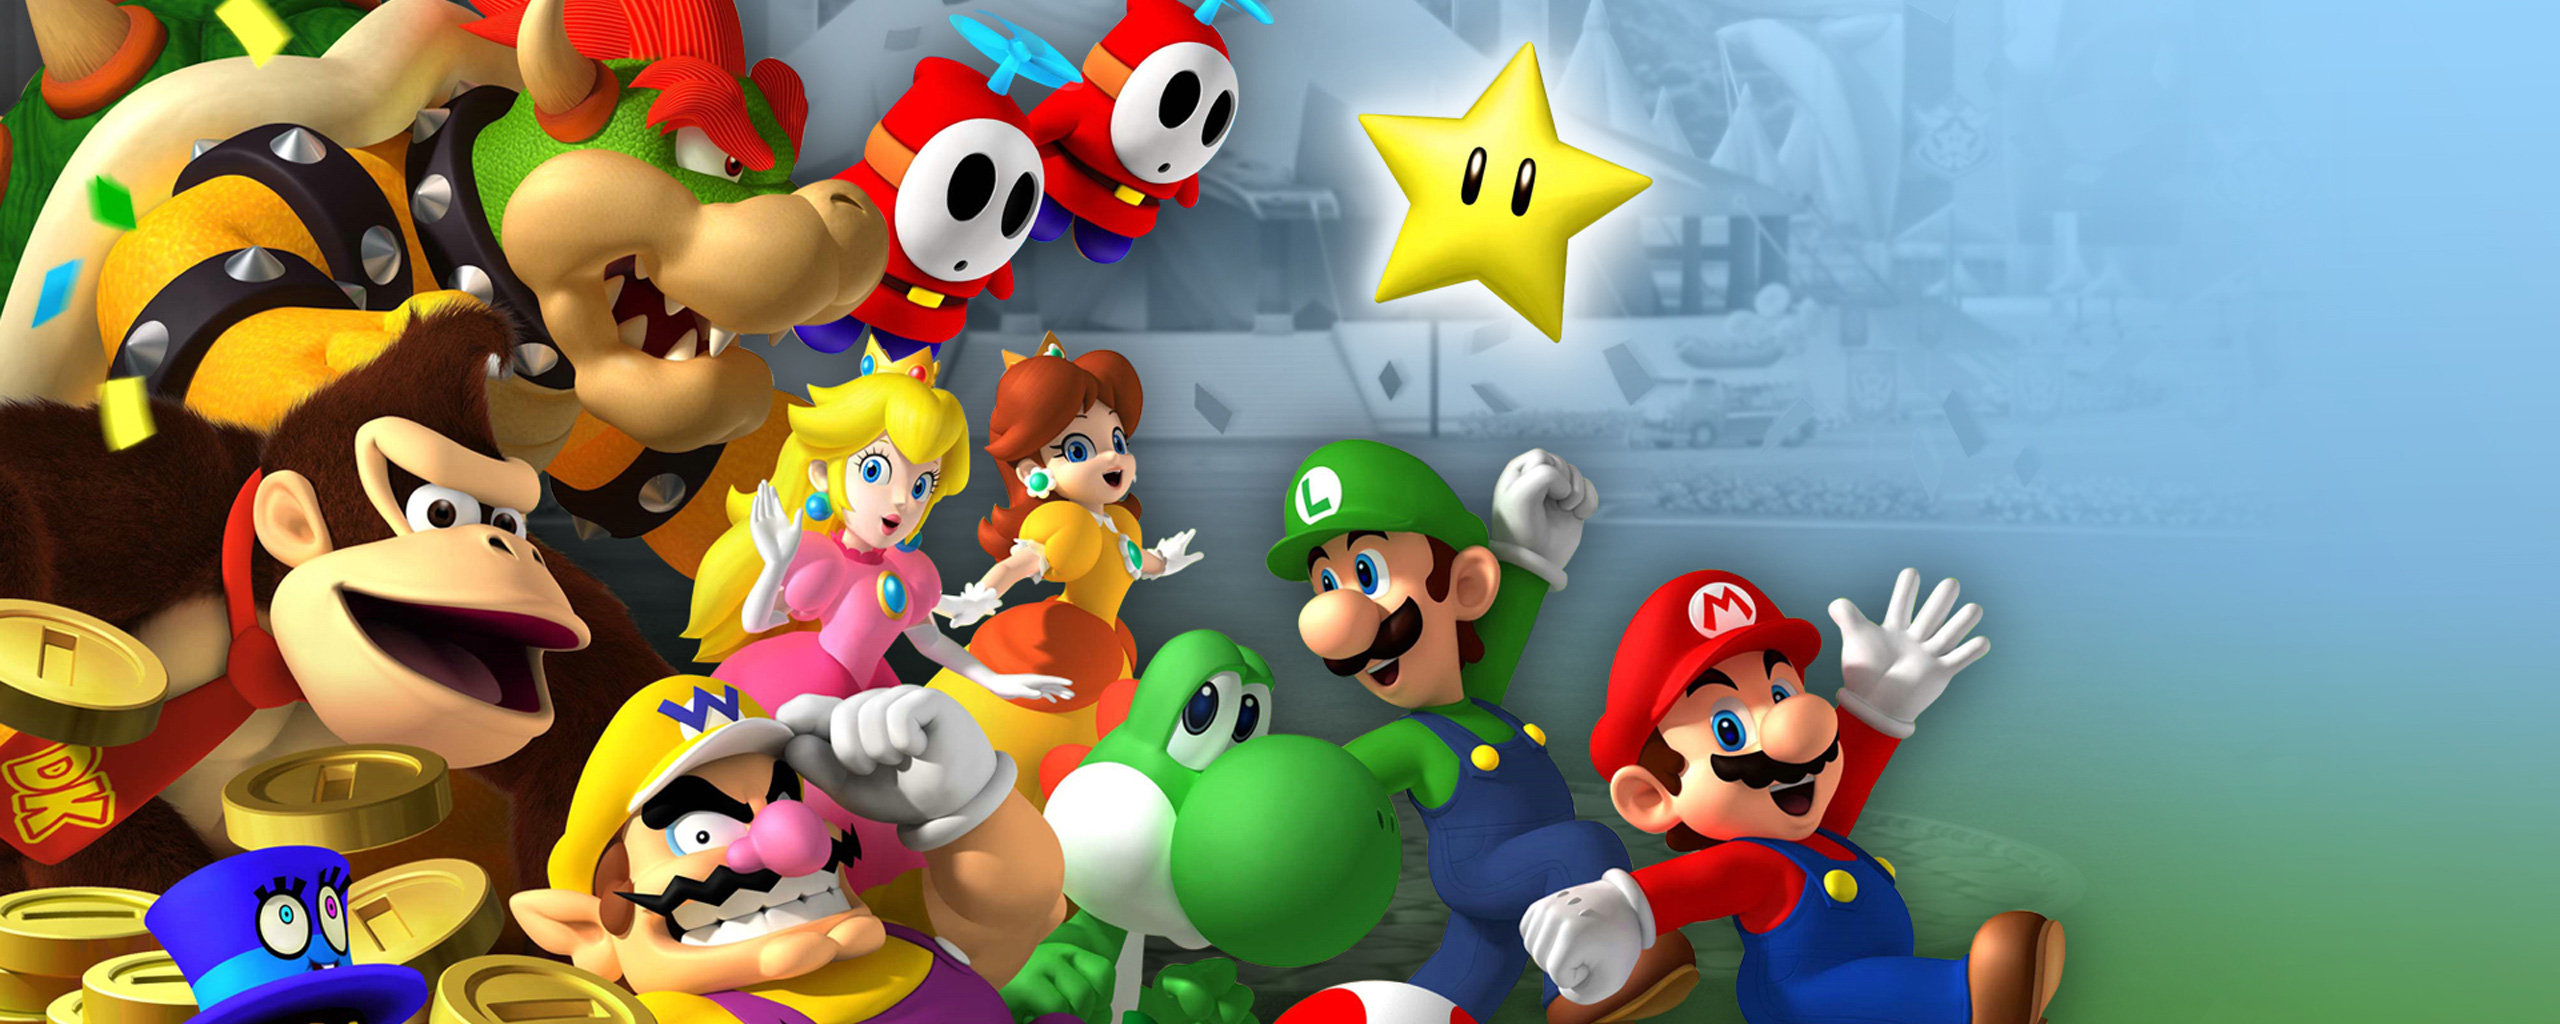 Overwinnen nationale vlag Pas op Download "Mario Party 8" wallpapers for mobile phone, free "Mario Party 8"  HD pictures